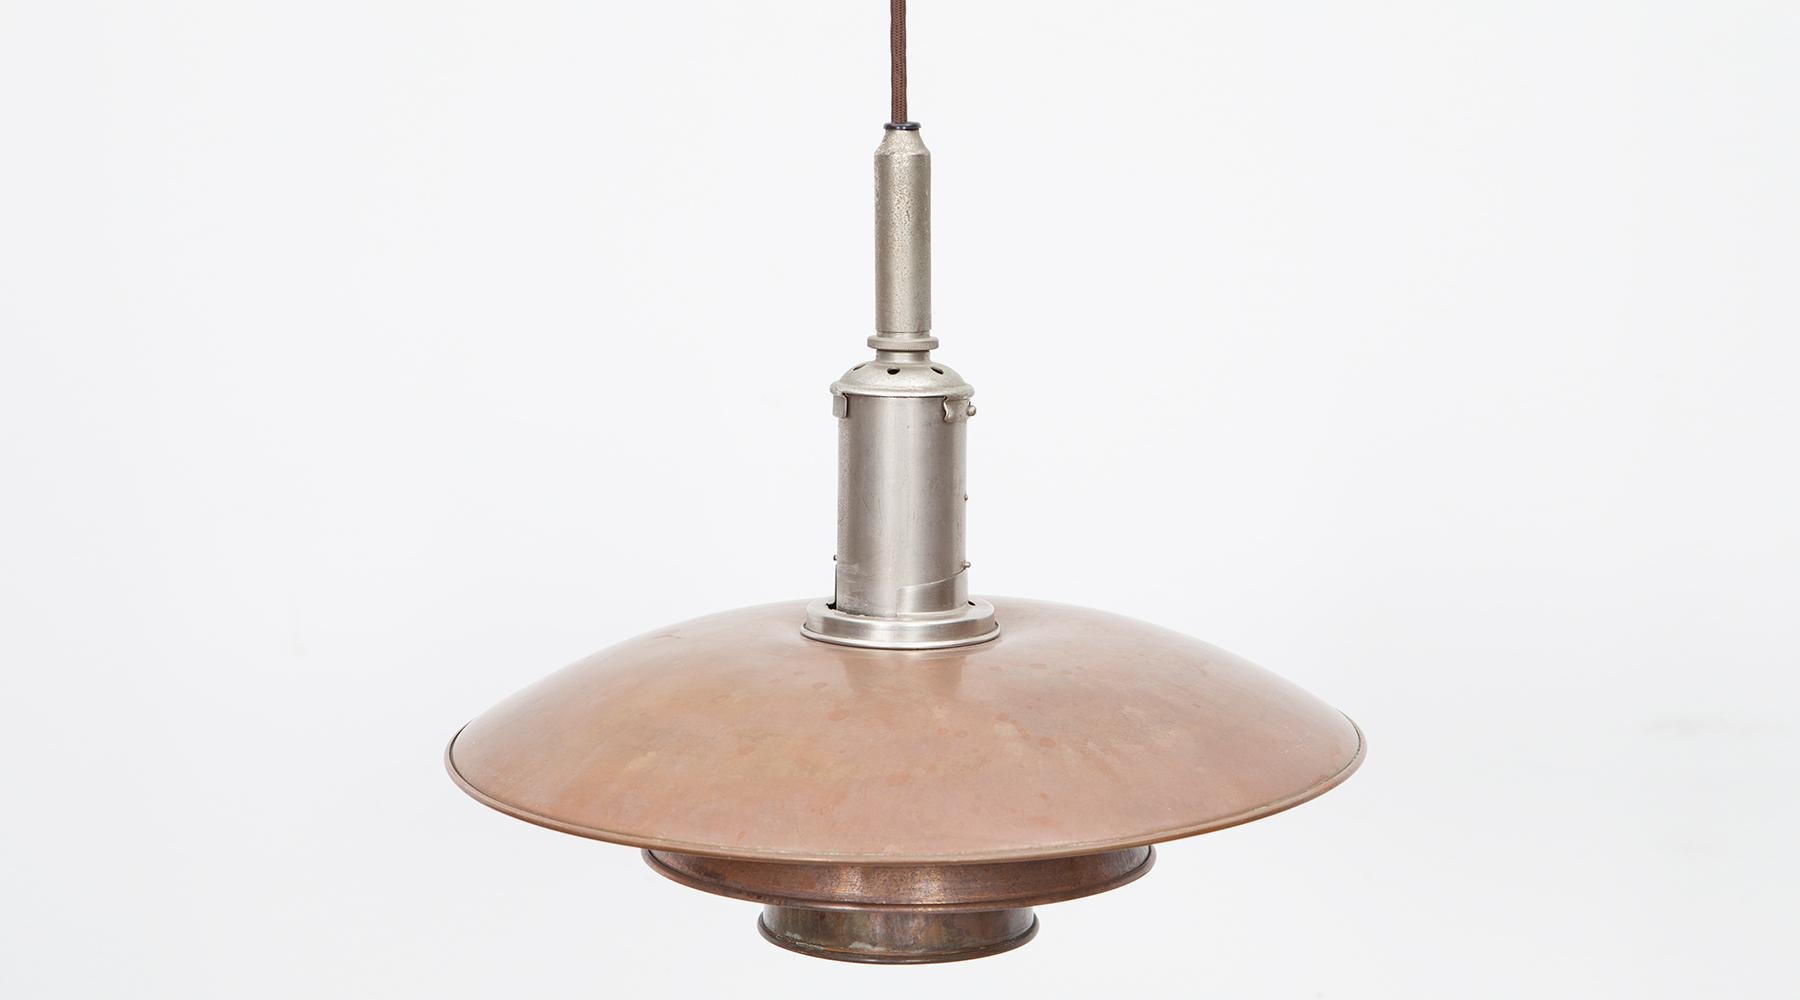 Ceiling lamp 3.6 / 3 in reddish Kupfer by Poul Henningsen, Denmark, 1940.

Ceiling Lamp of Poul Henningsen pendants with copper shades and nickel-plated fitment gives a soft, warm light. Designed by Poul Henningsen in the 1940s. He designed several